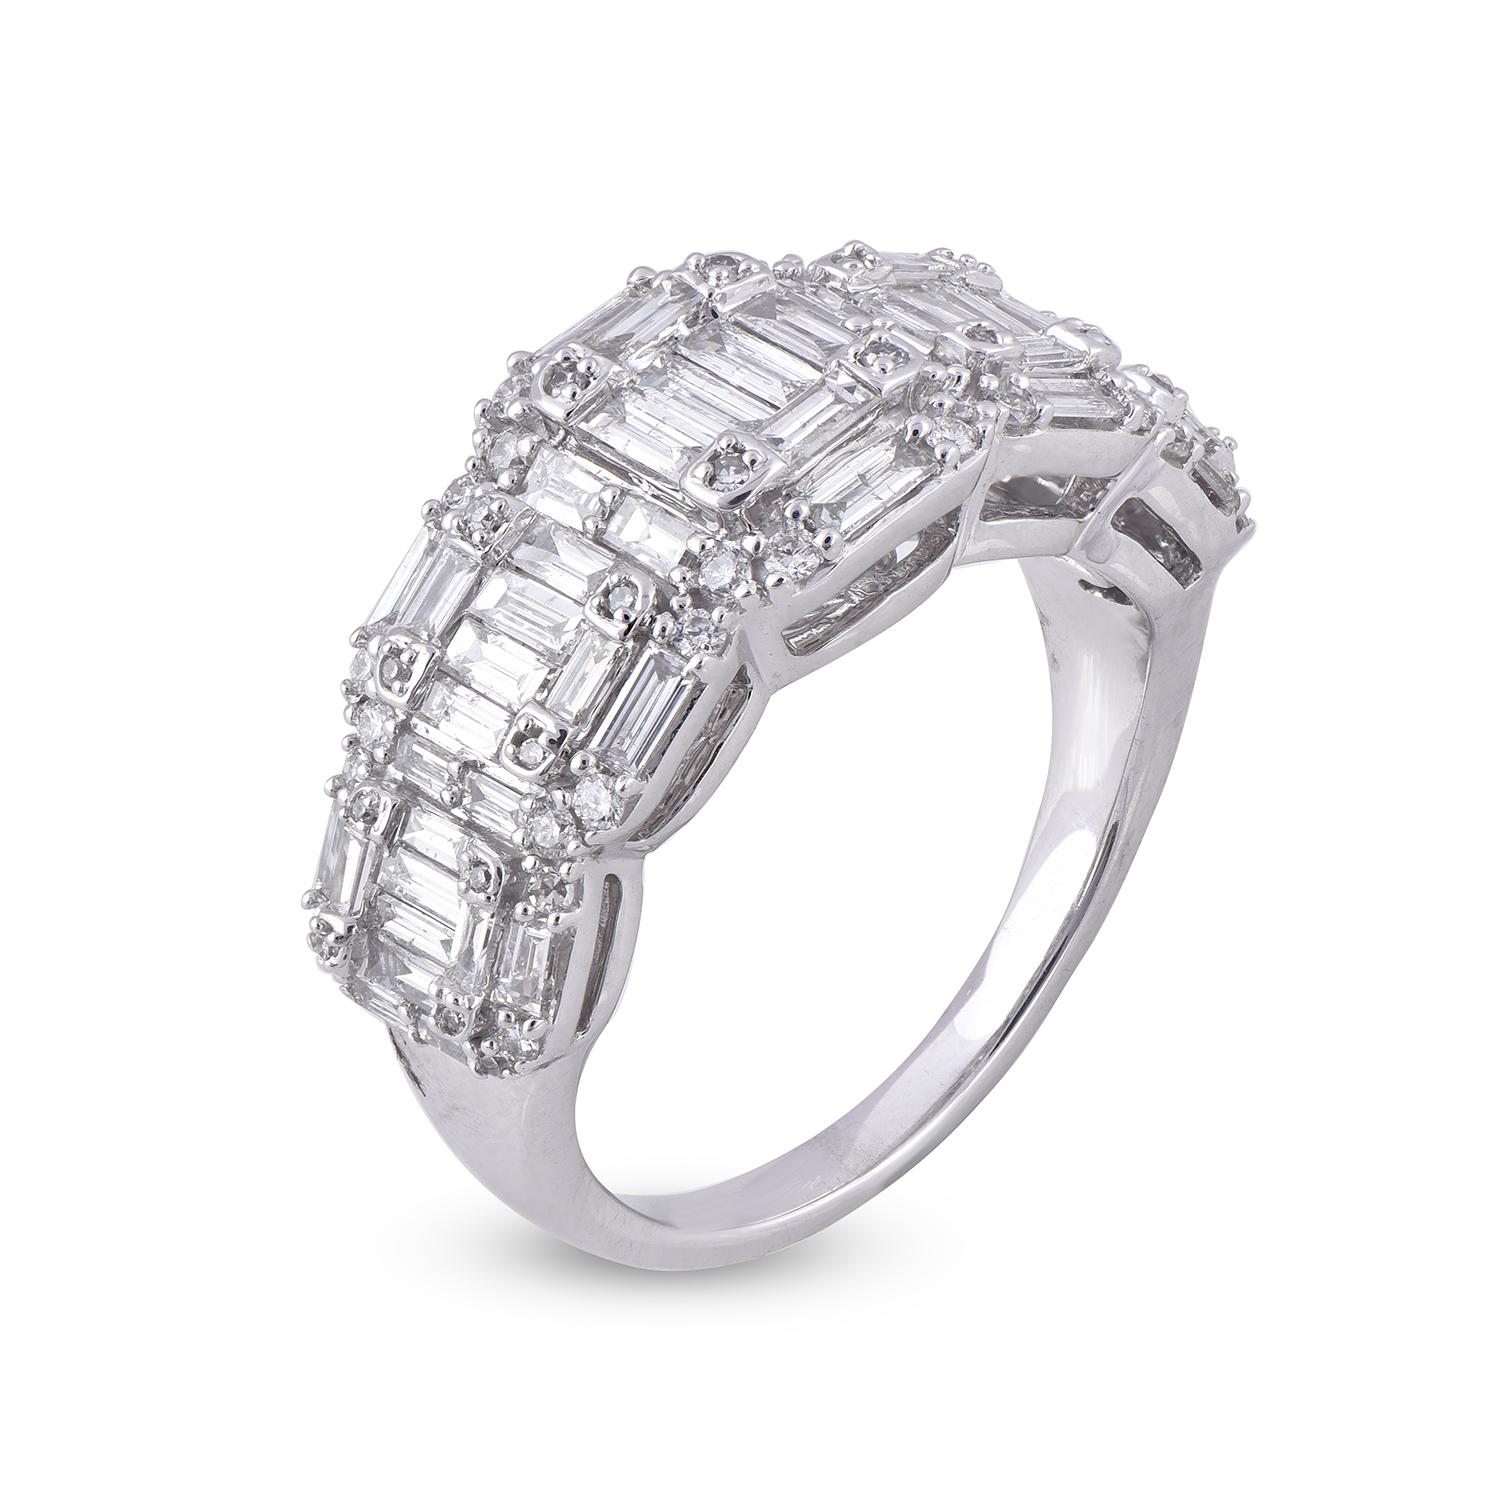 Sparkling with Round and Baguette diamonds, this ring is crafted in 14 karat White gold with 52 round and 52 Baguette cut diamonds embedded beautifully in prong and pave setting, diamonds are graded H-I Color, I2 Clarity.
